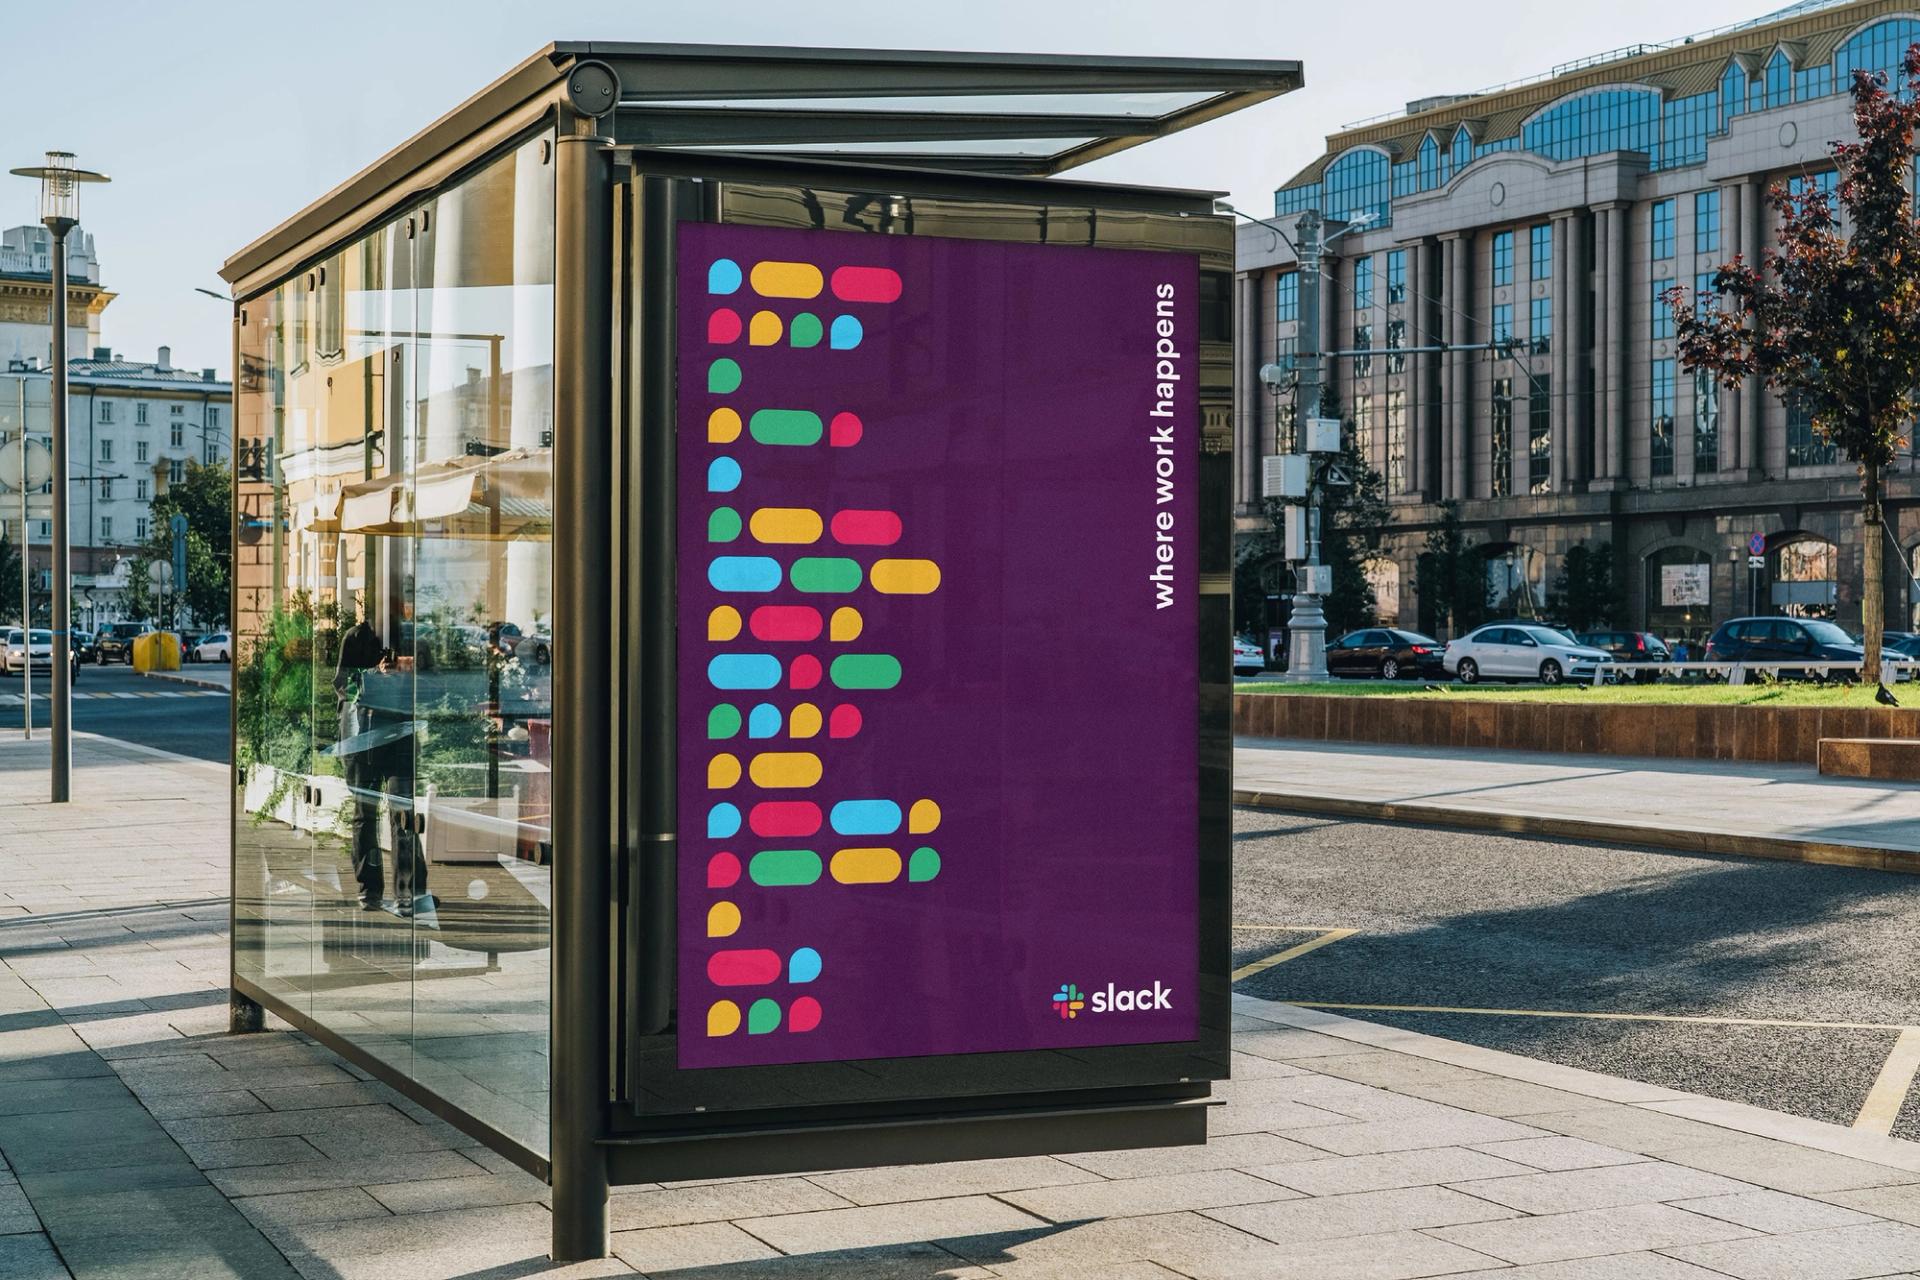 A bus shelter poster featuring the signature Slack colors and branding.